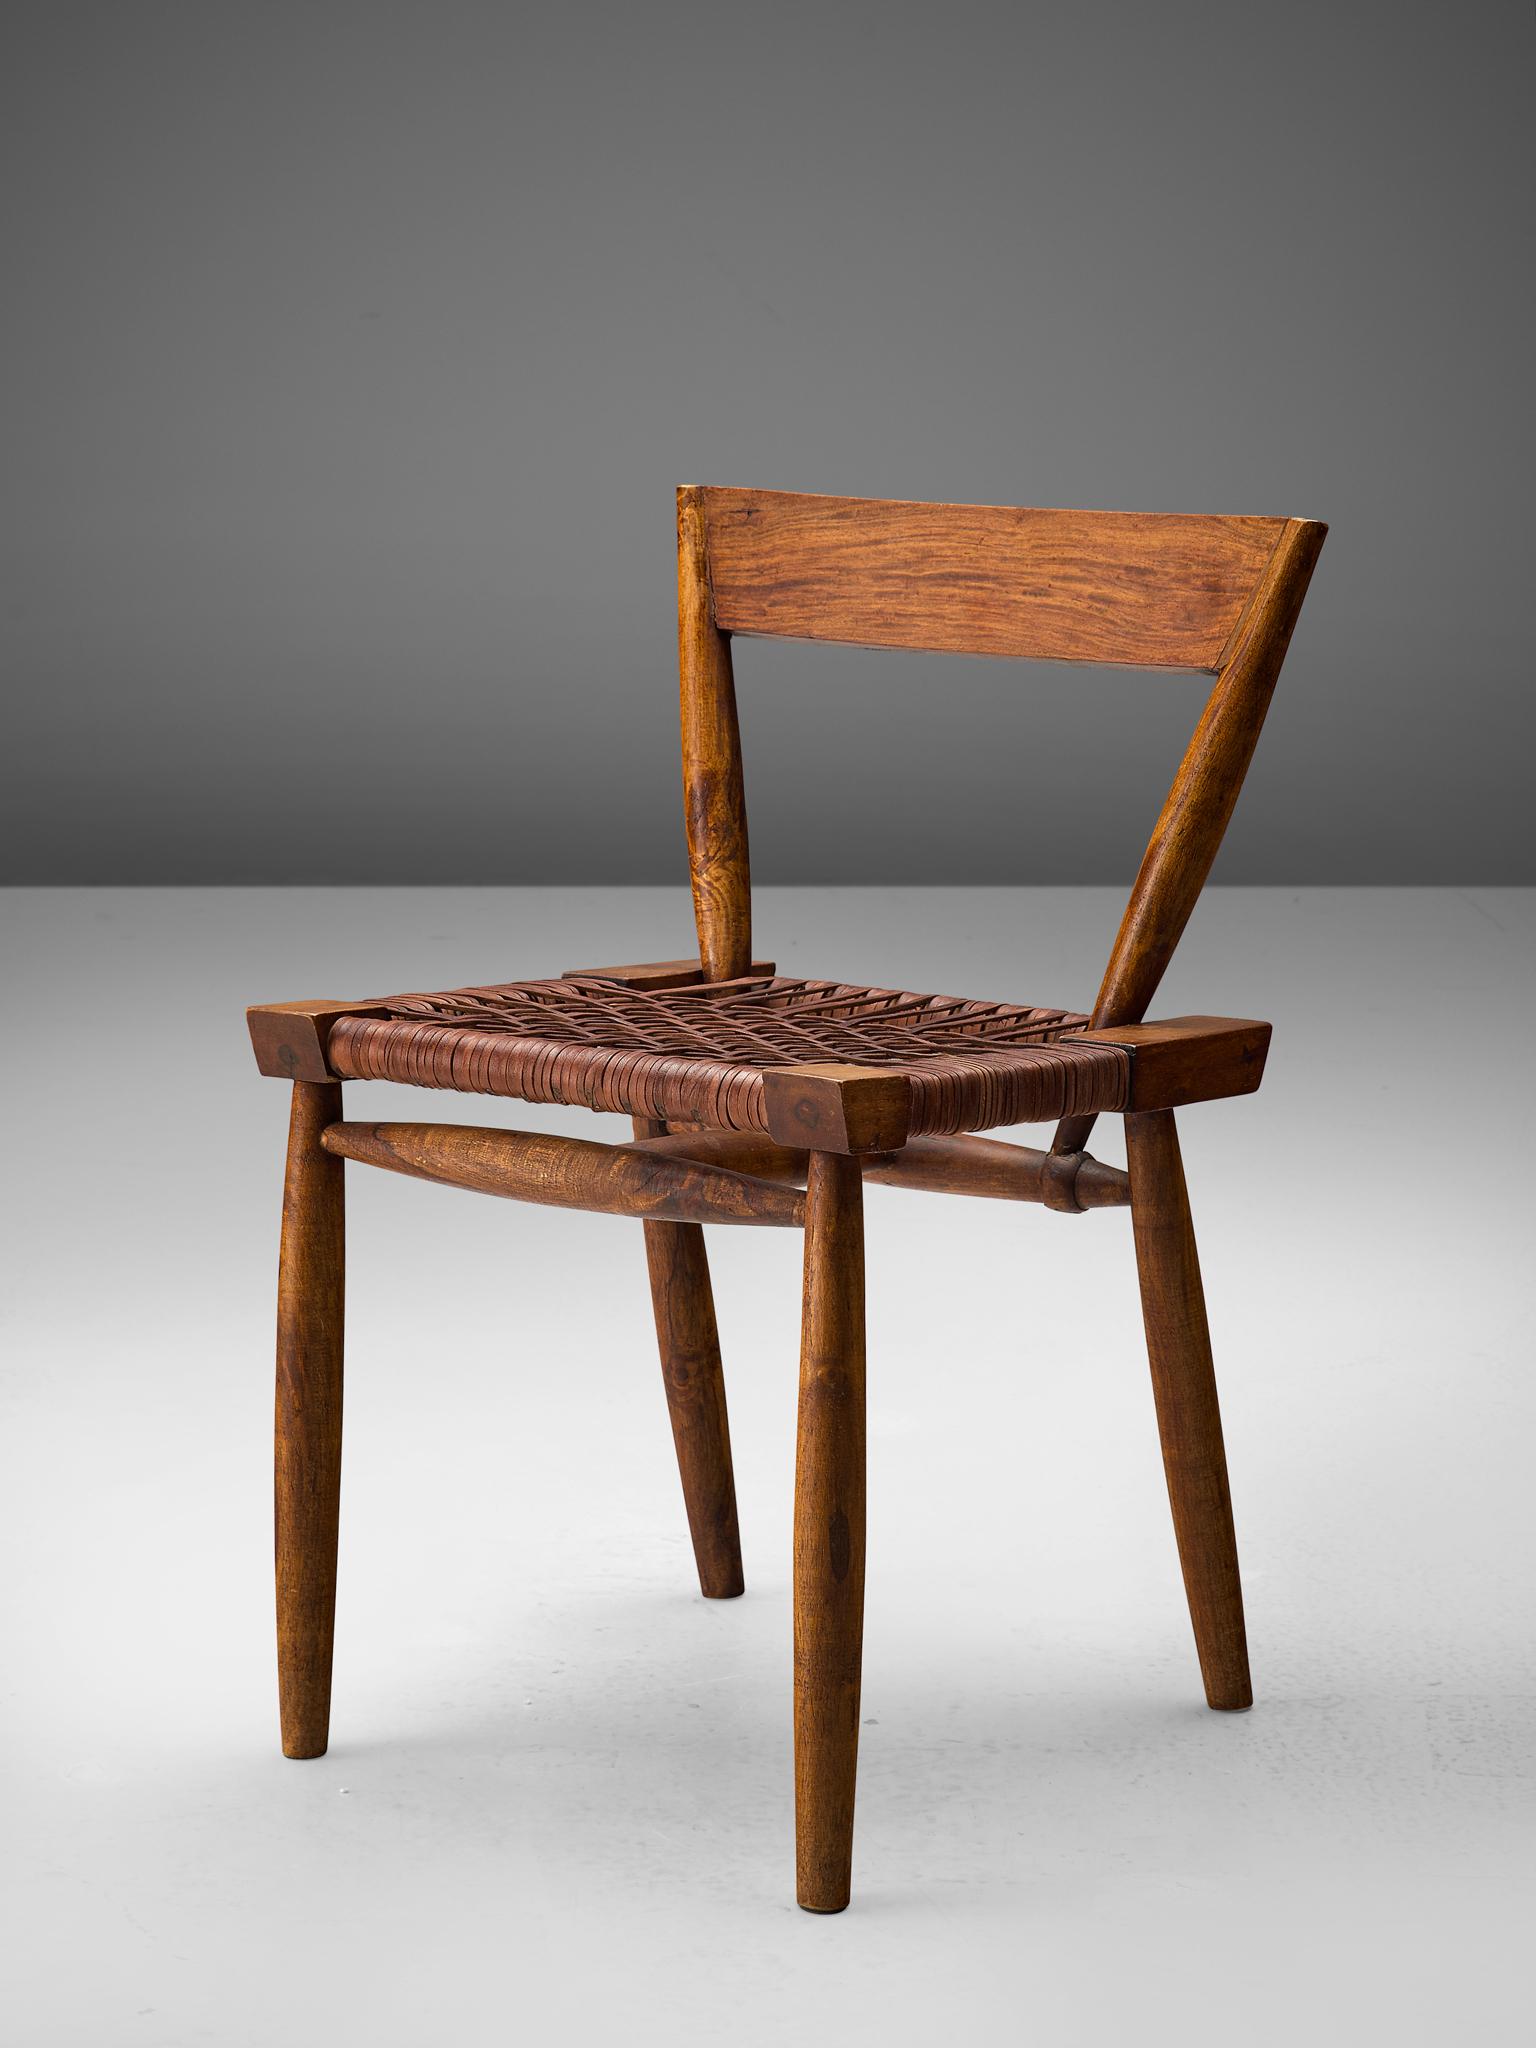 American Craftsman Sculptural Side Chair with Woven Leather Seat